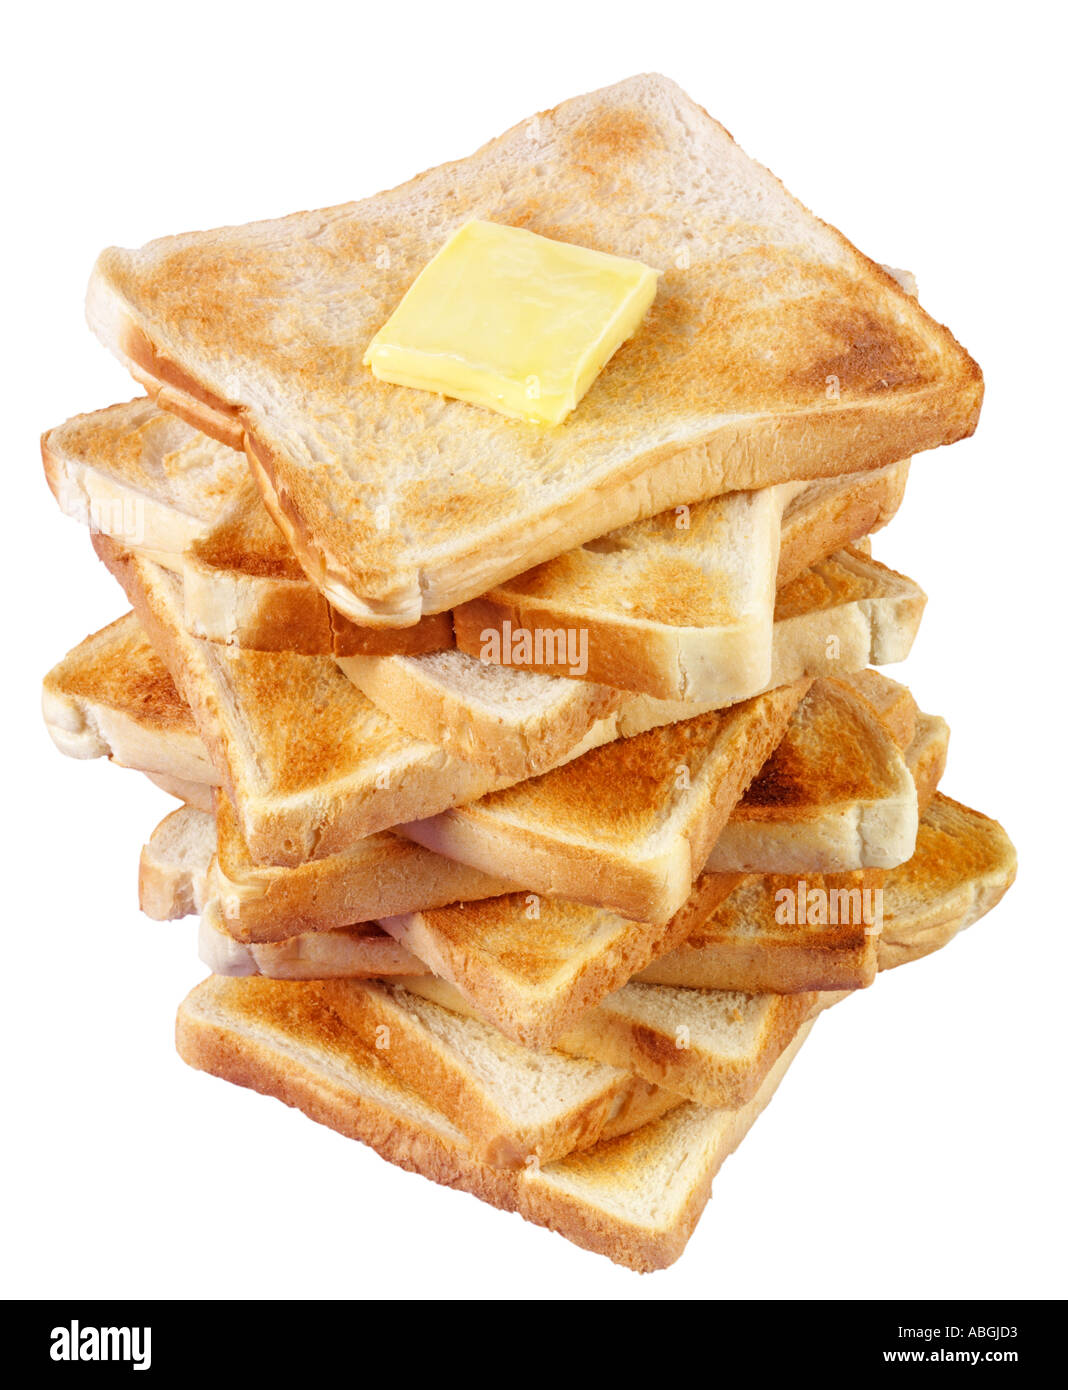 stack-of-toast-with-butter-on-white-ABGJ